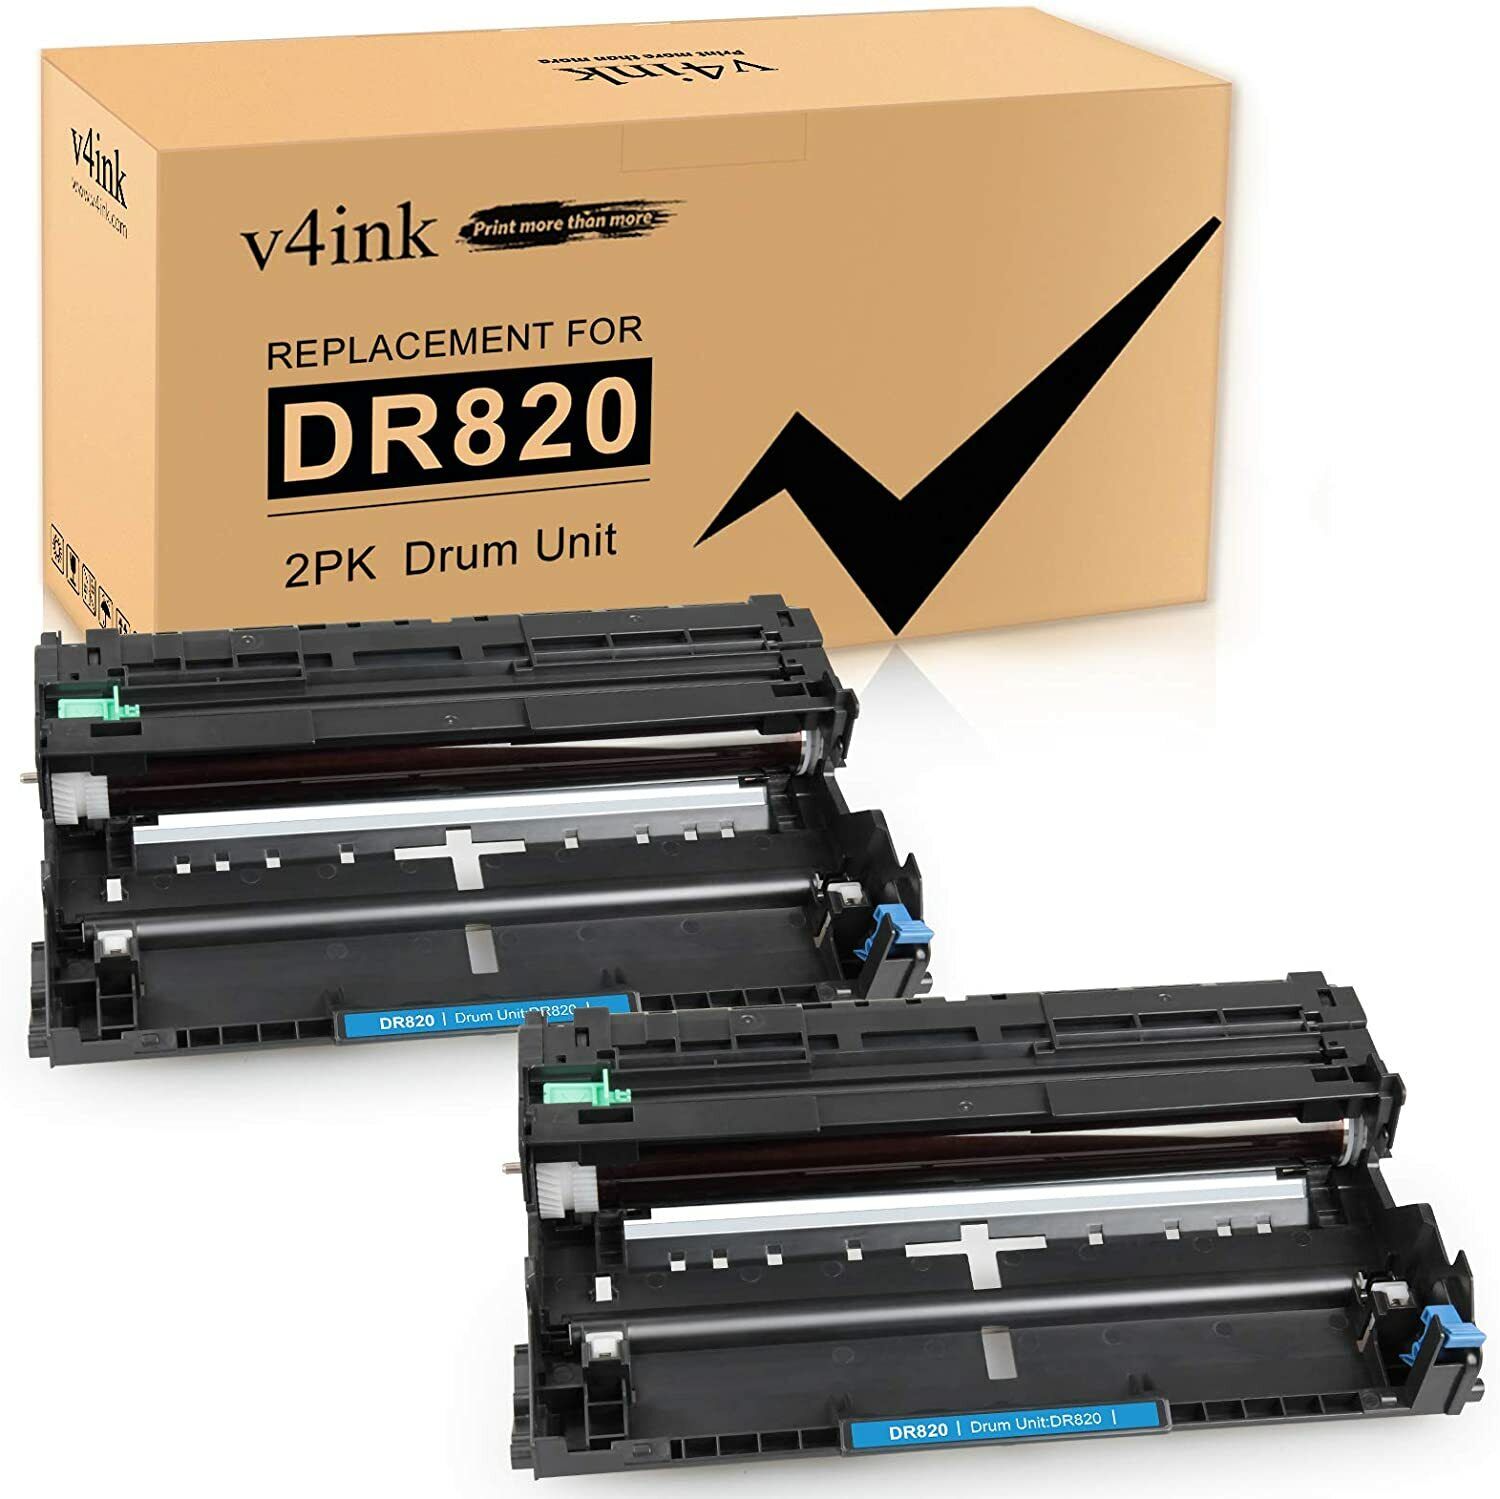 2PK Compatible Brother DR820 Drum Unit use with HLL6200DW L6200DWT L5100DN v4ink